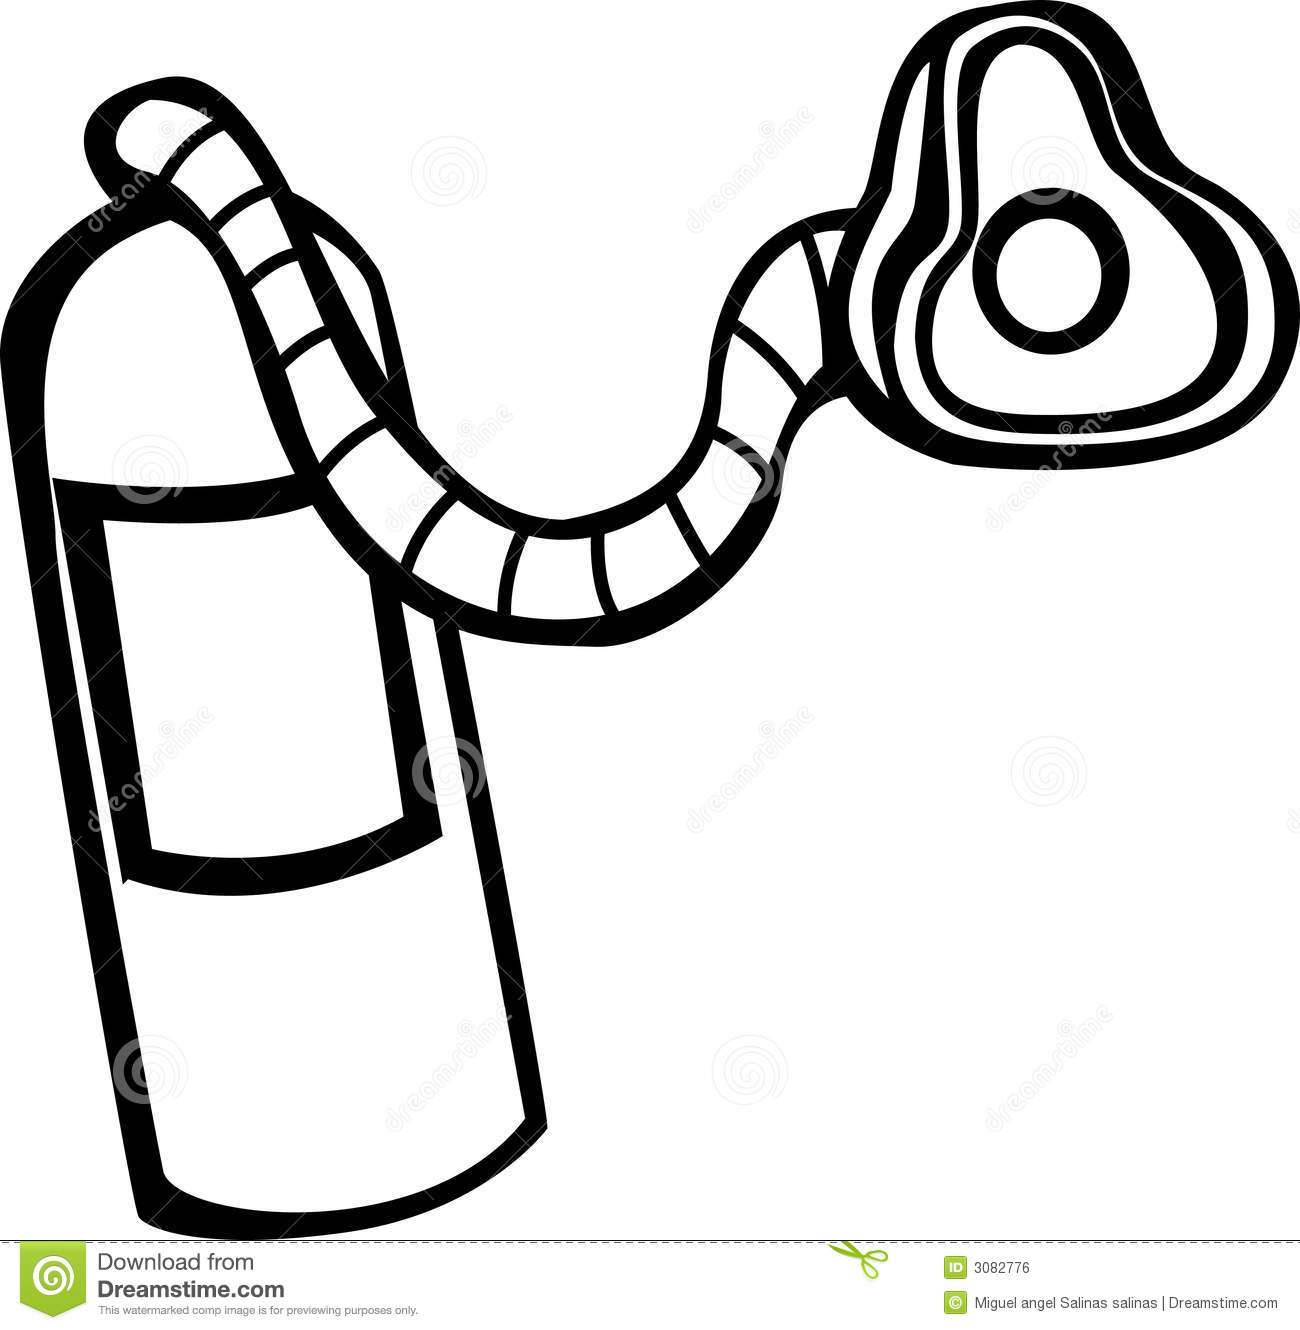 Oxygen Tank And Mask Vector Illustration Royalty Free Stock Image